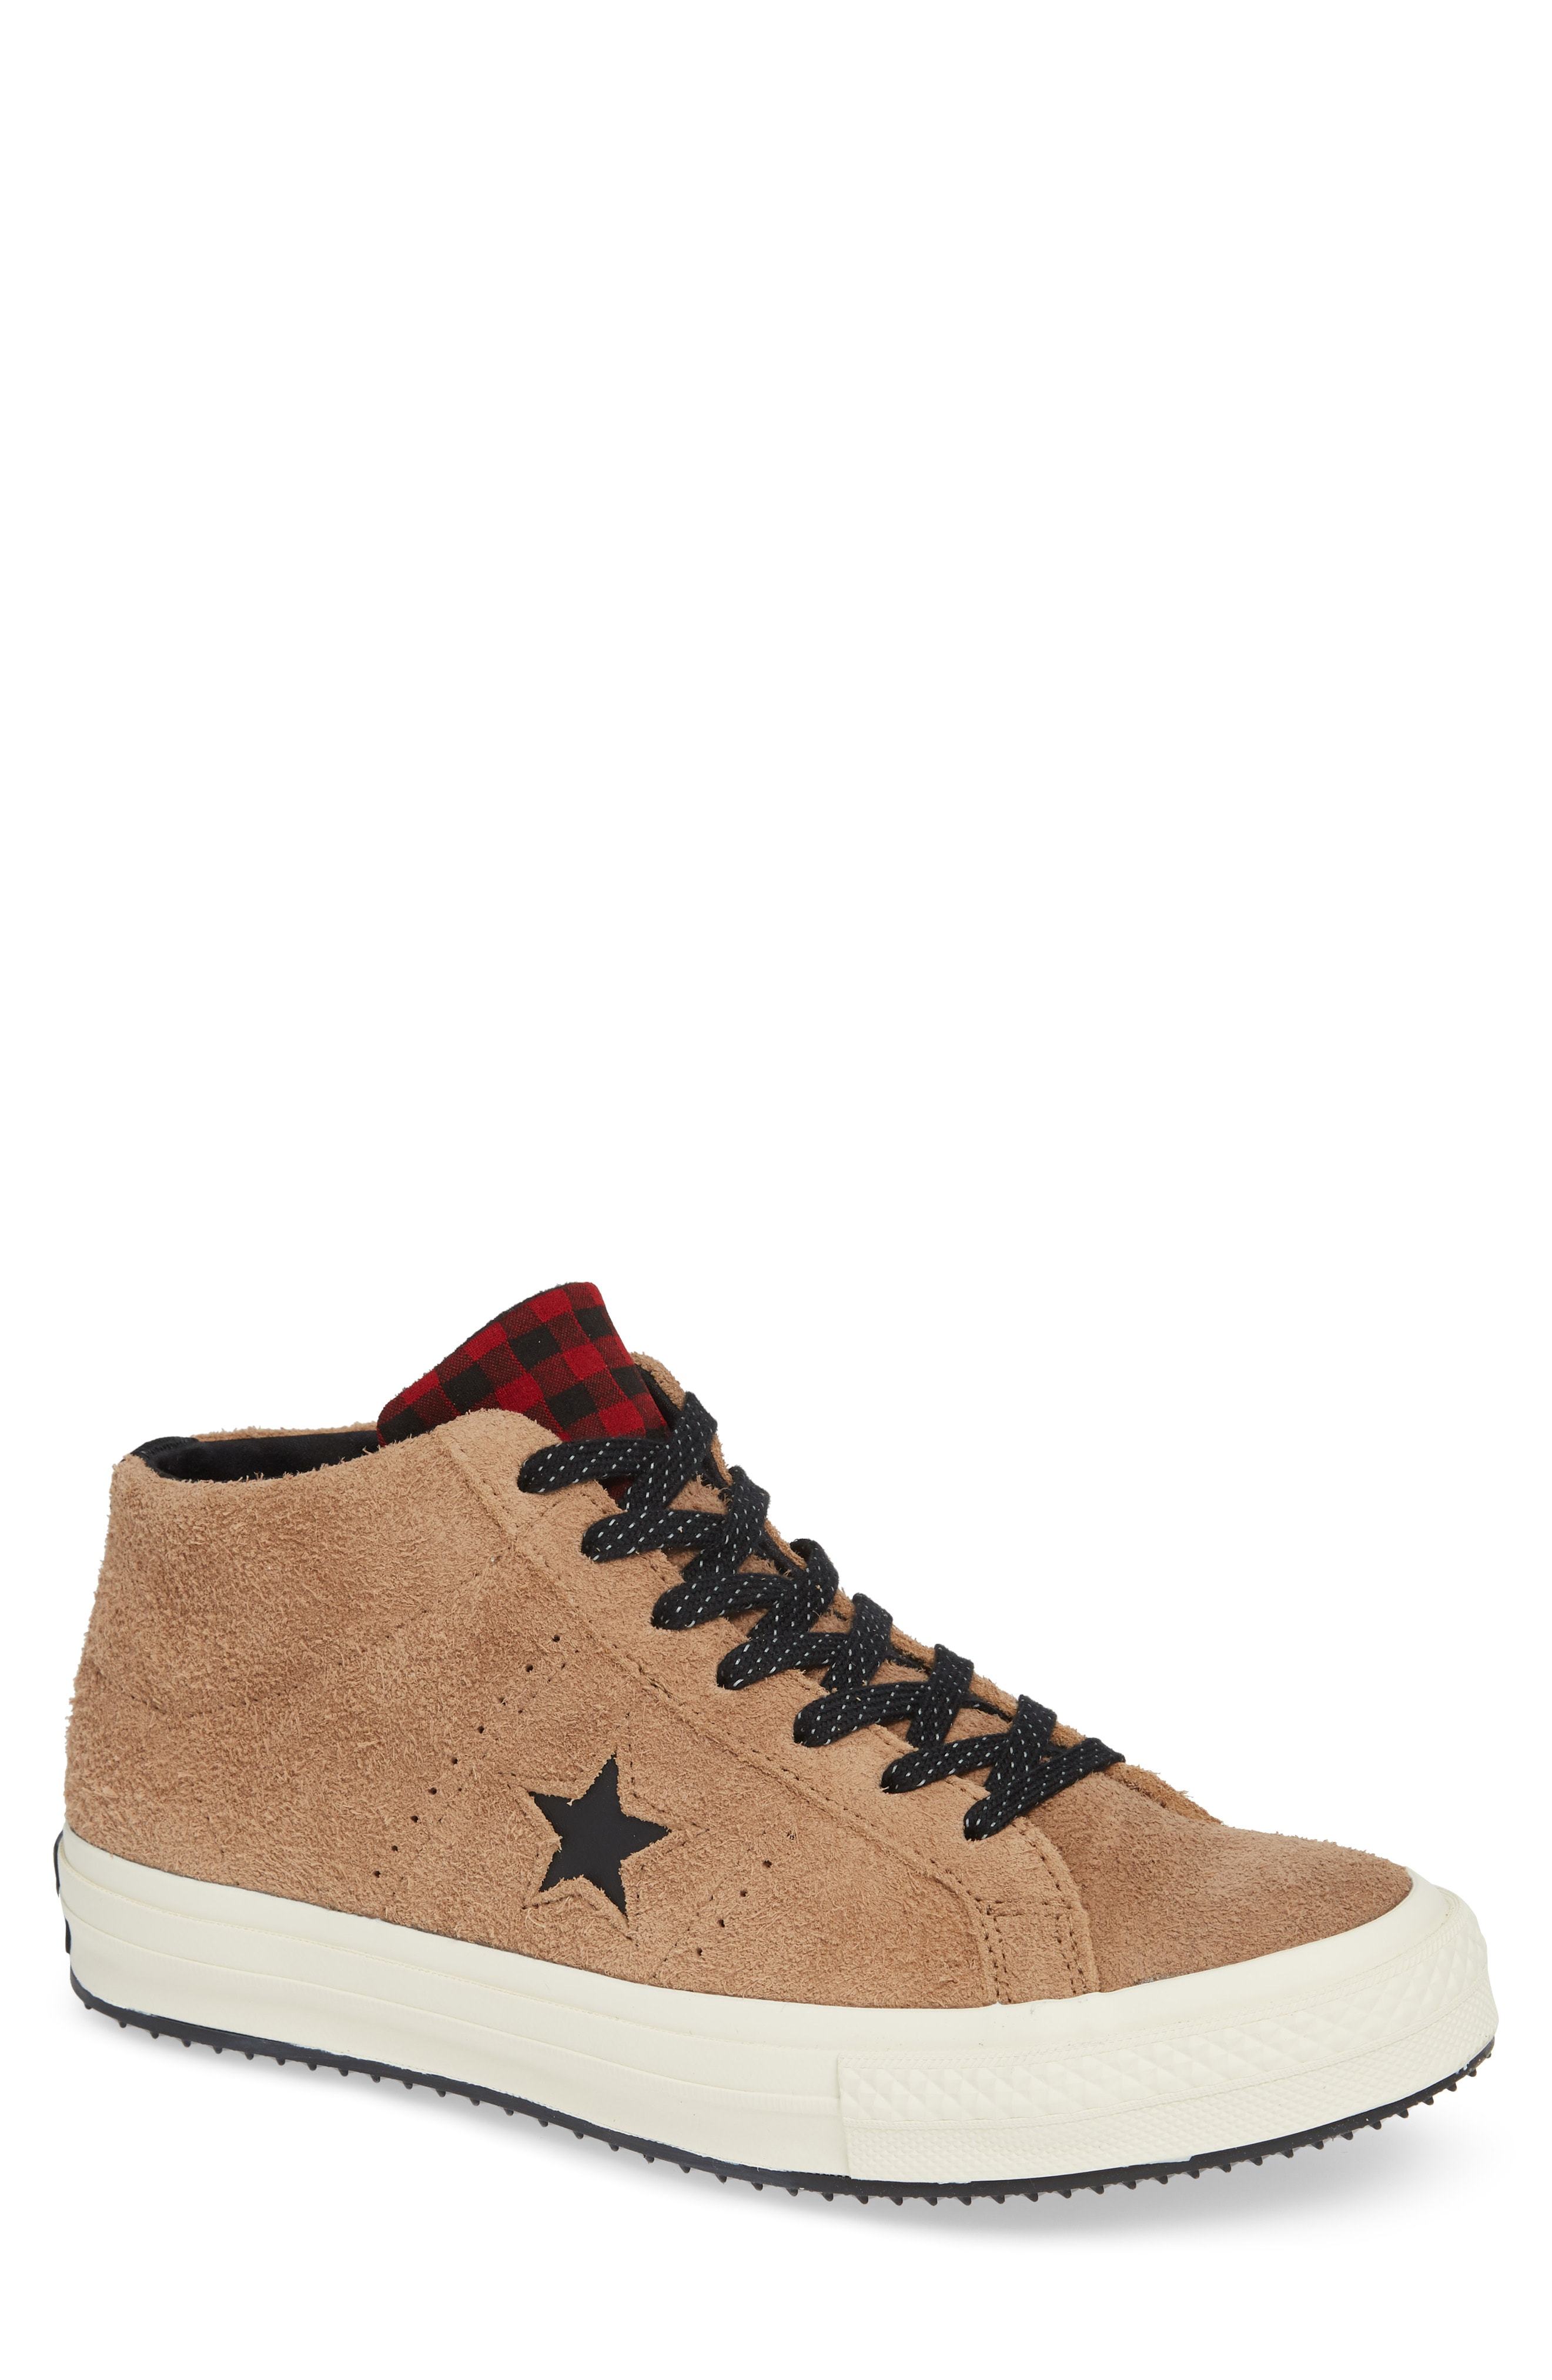 converse one star nordstrom